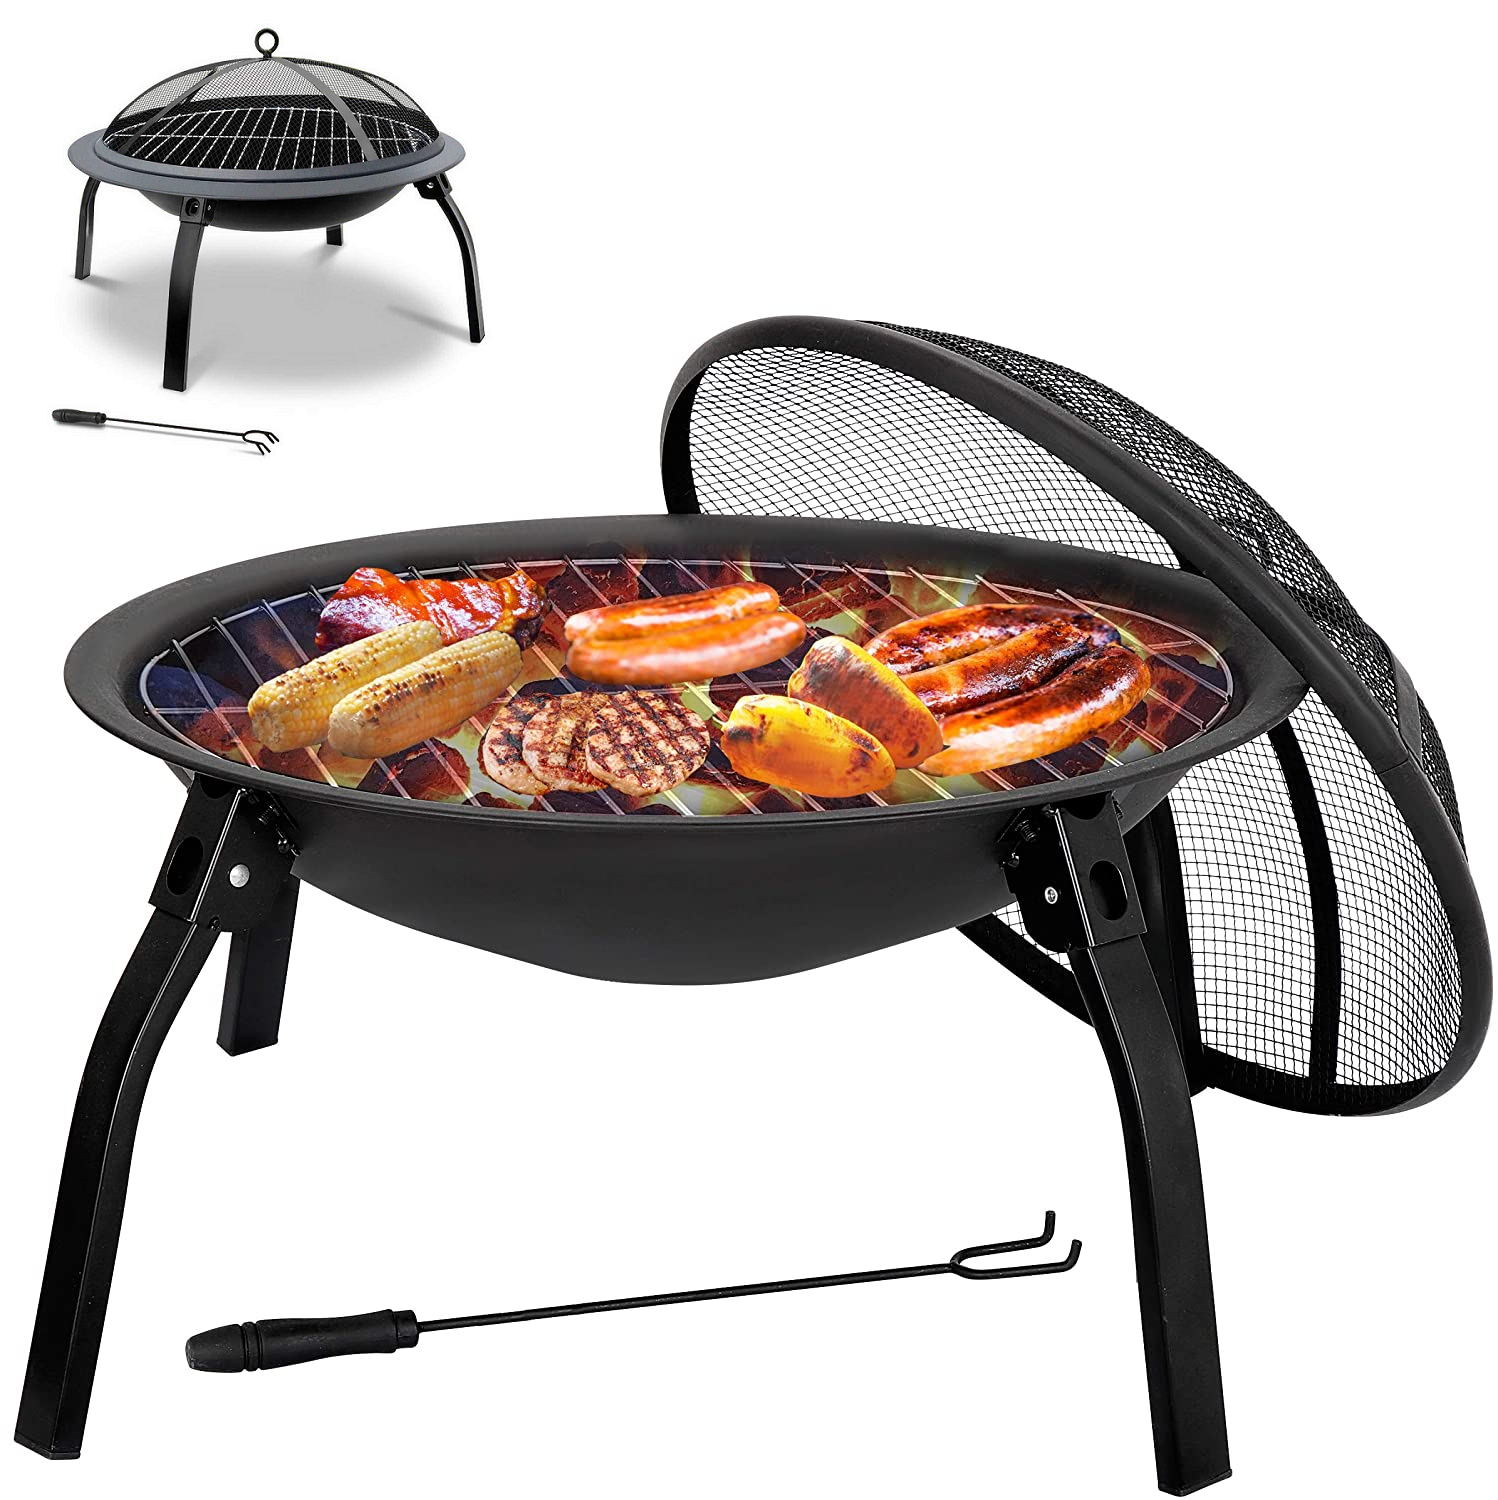 22inch Folding Steel Fire Pit Bbq Grill, Round Fire Pit Grill